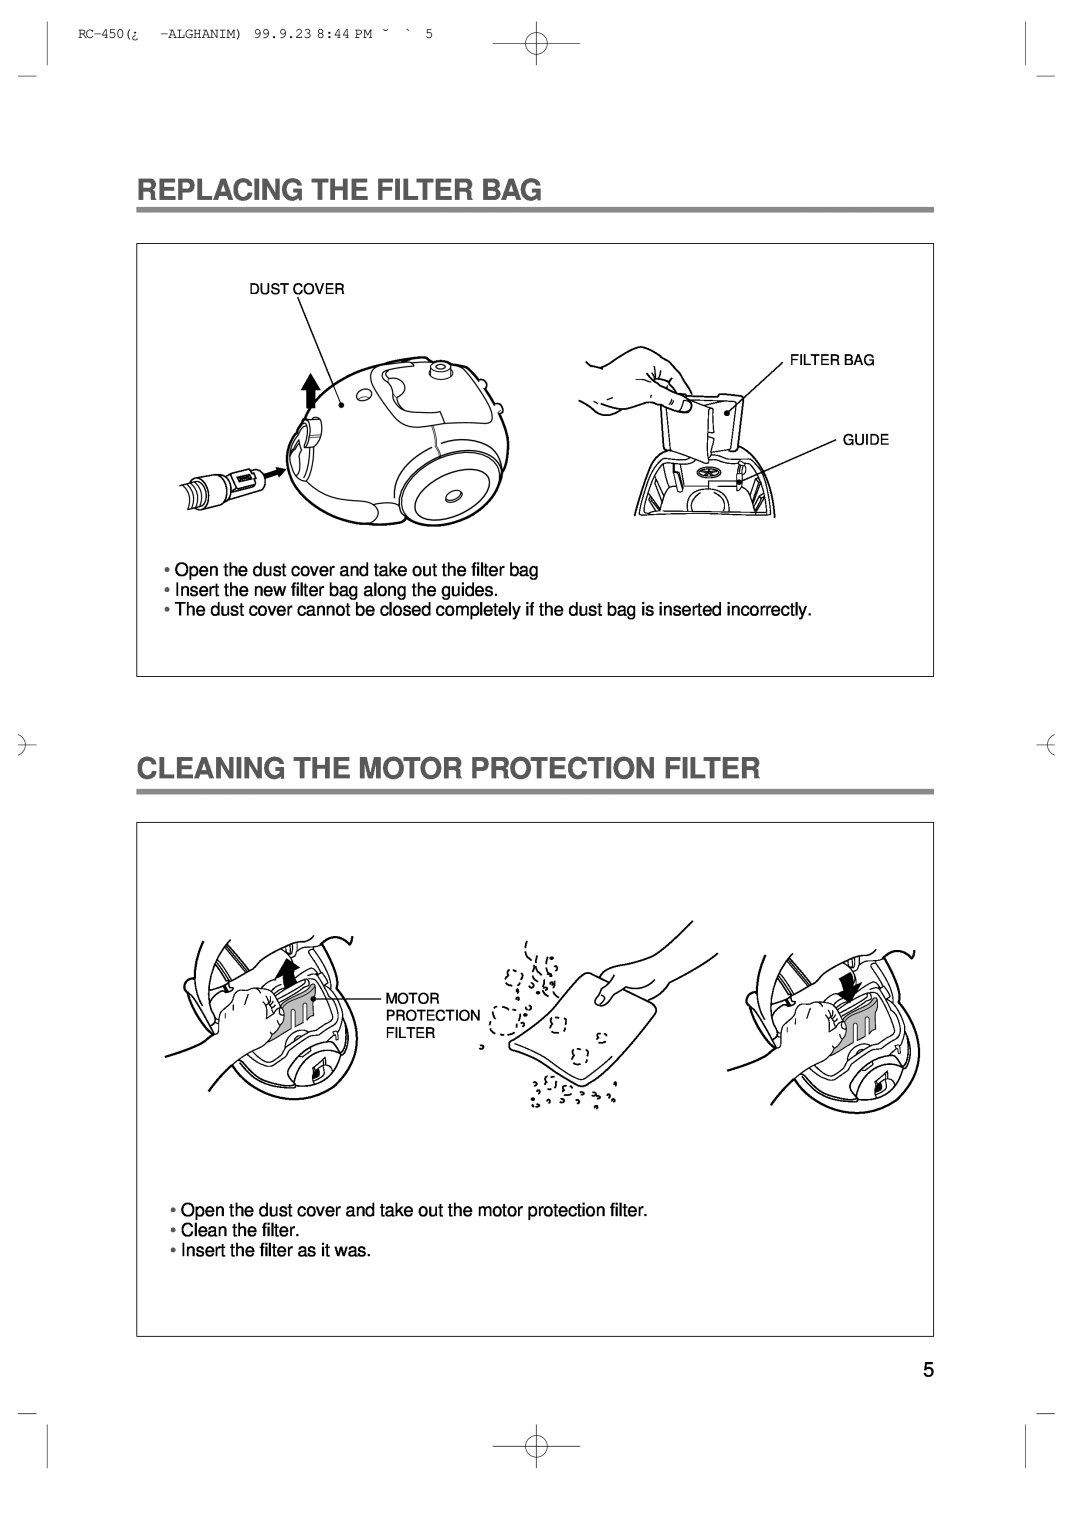 Daewoo RC-450 owner manual Replacing The Filter Bag, Cleaning The Motor Protection Filter 